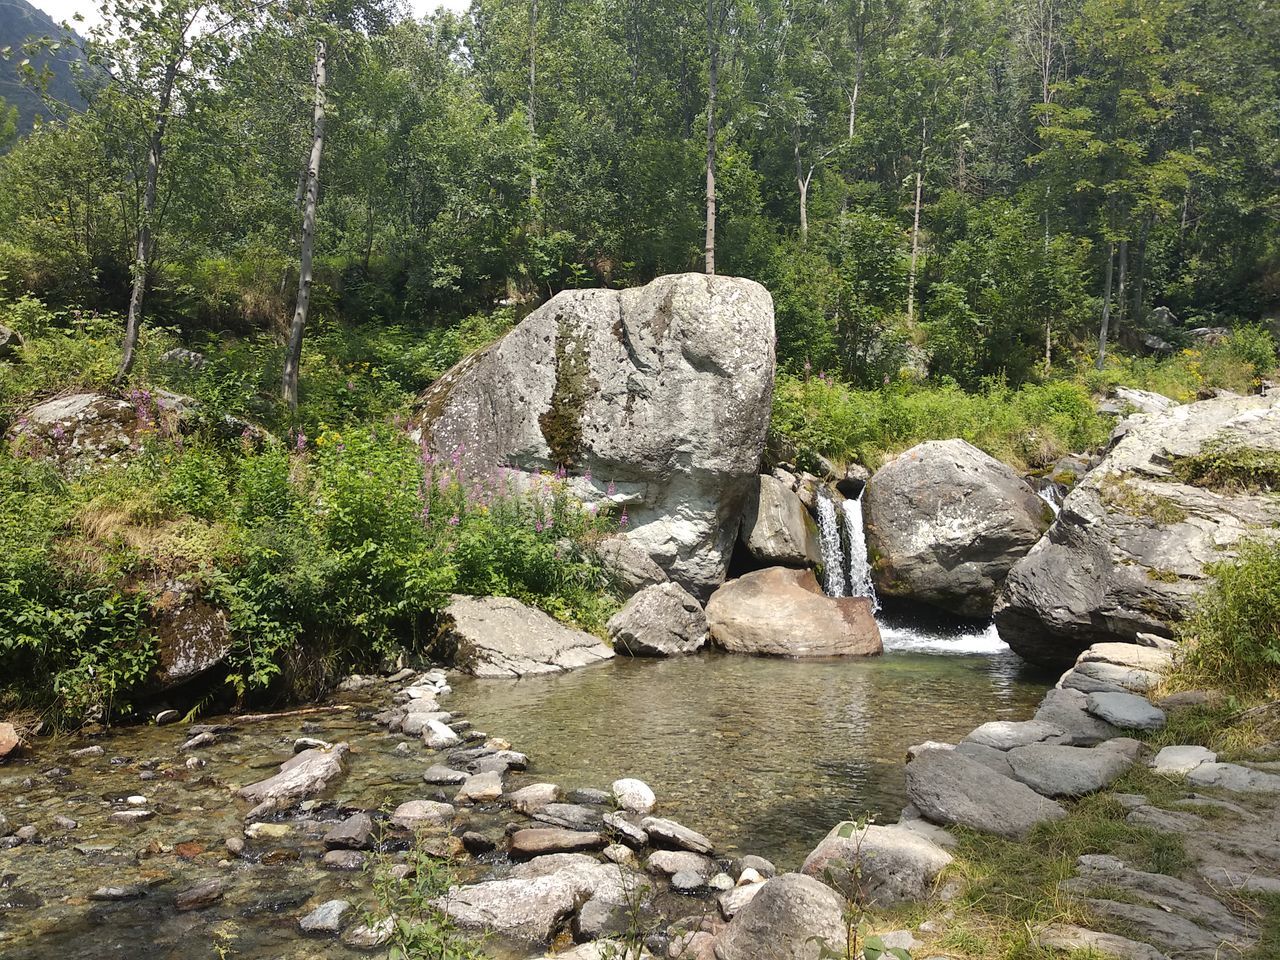 rock, plant, solid, rock - object, tree, nature, water, forest, land, beauty in nature, tranquility, growth, no people, day, tranquil scene, non-urban scene, scenics - nature, stone - object, environment, outdoors, stream - flowing water, flowing water, flowing